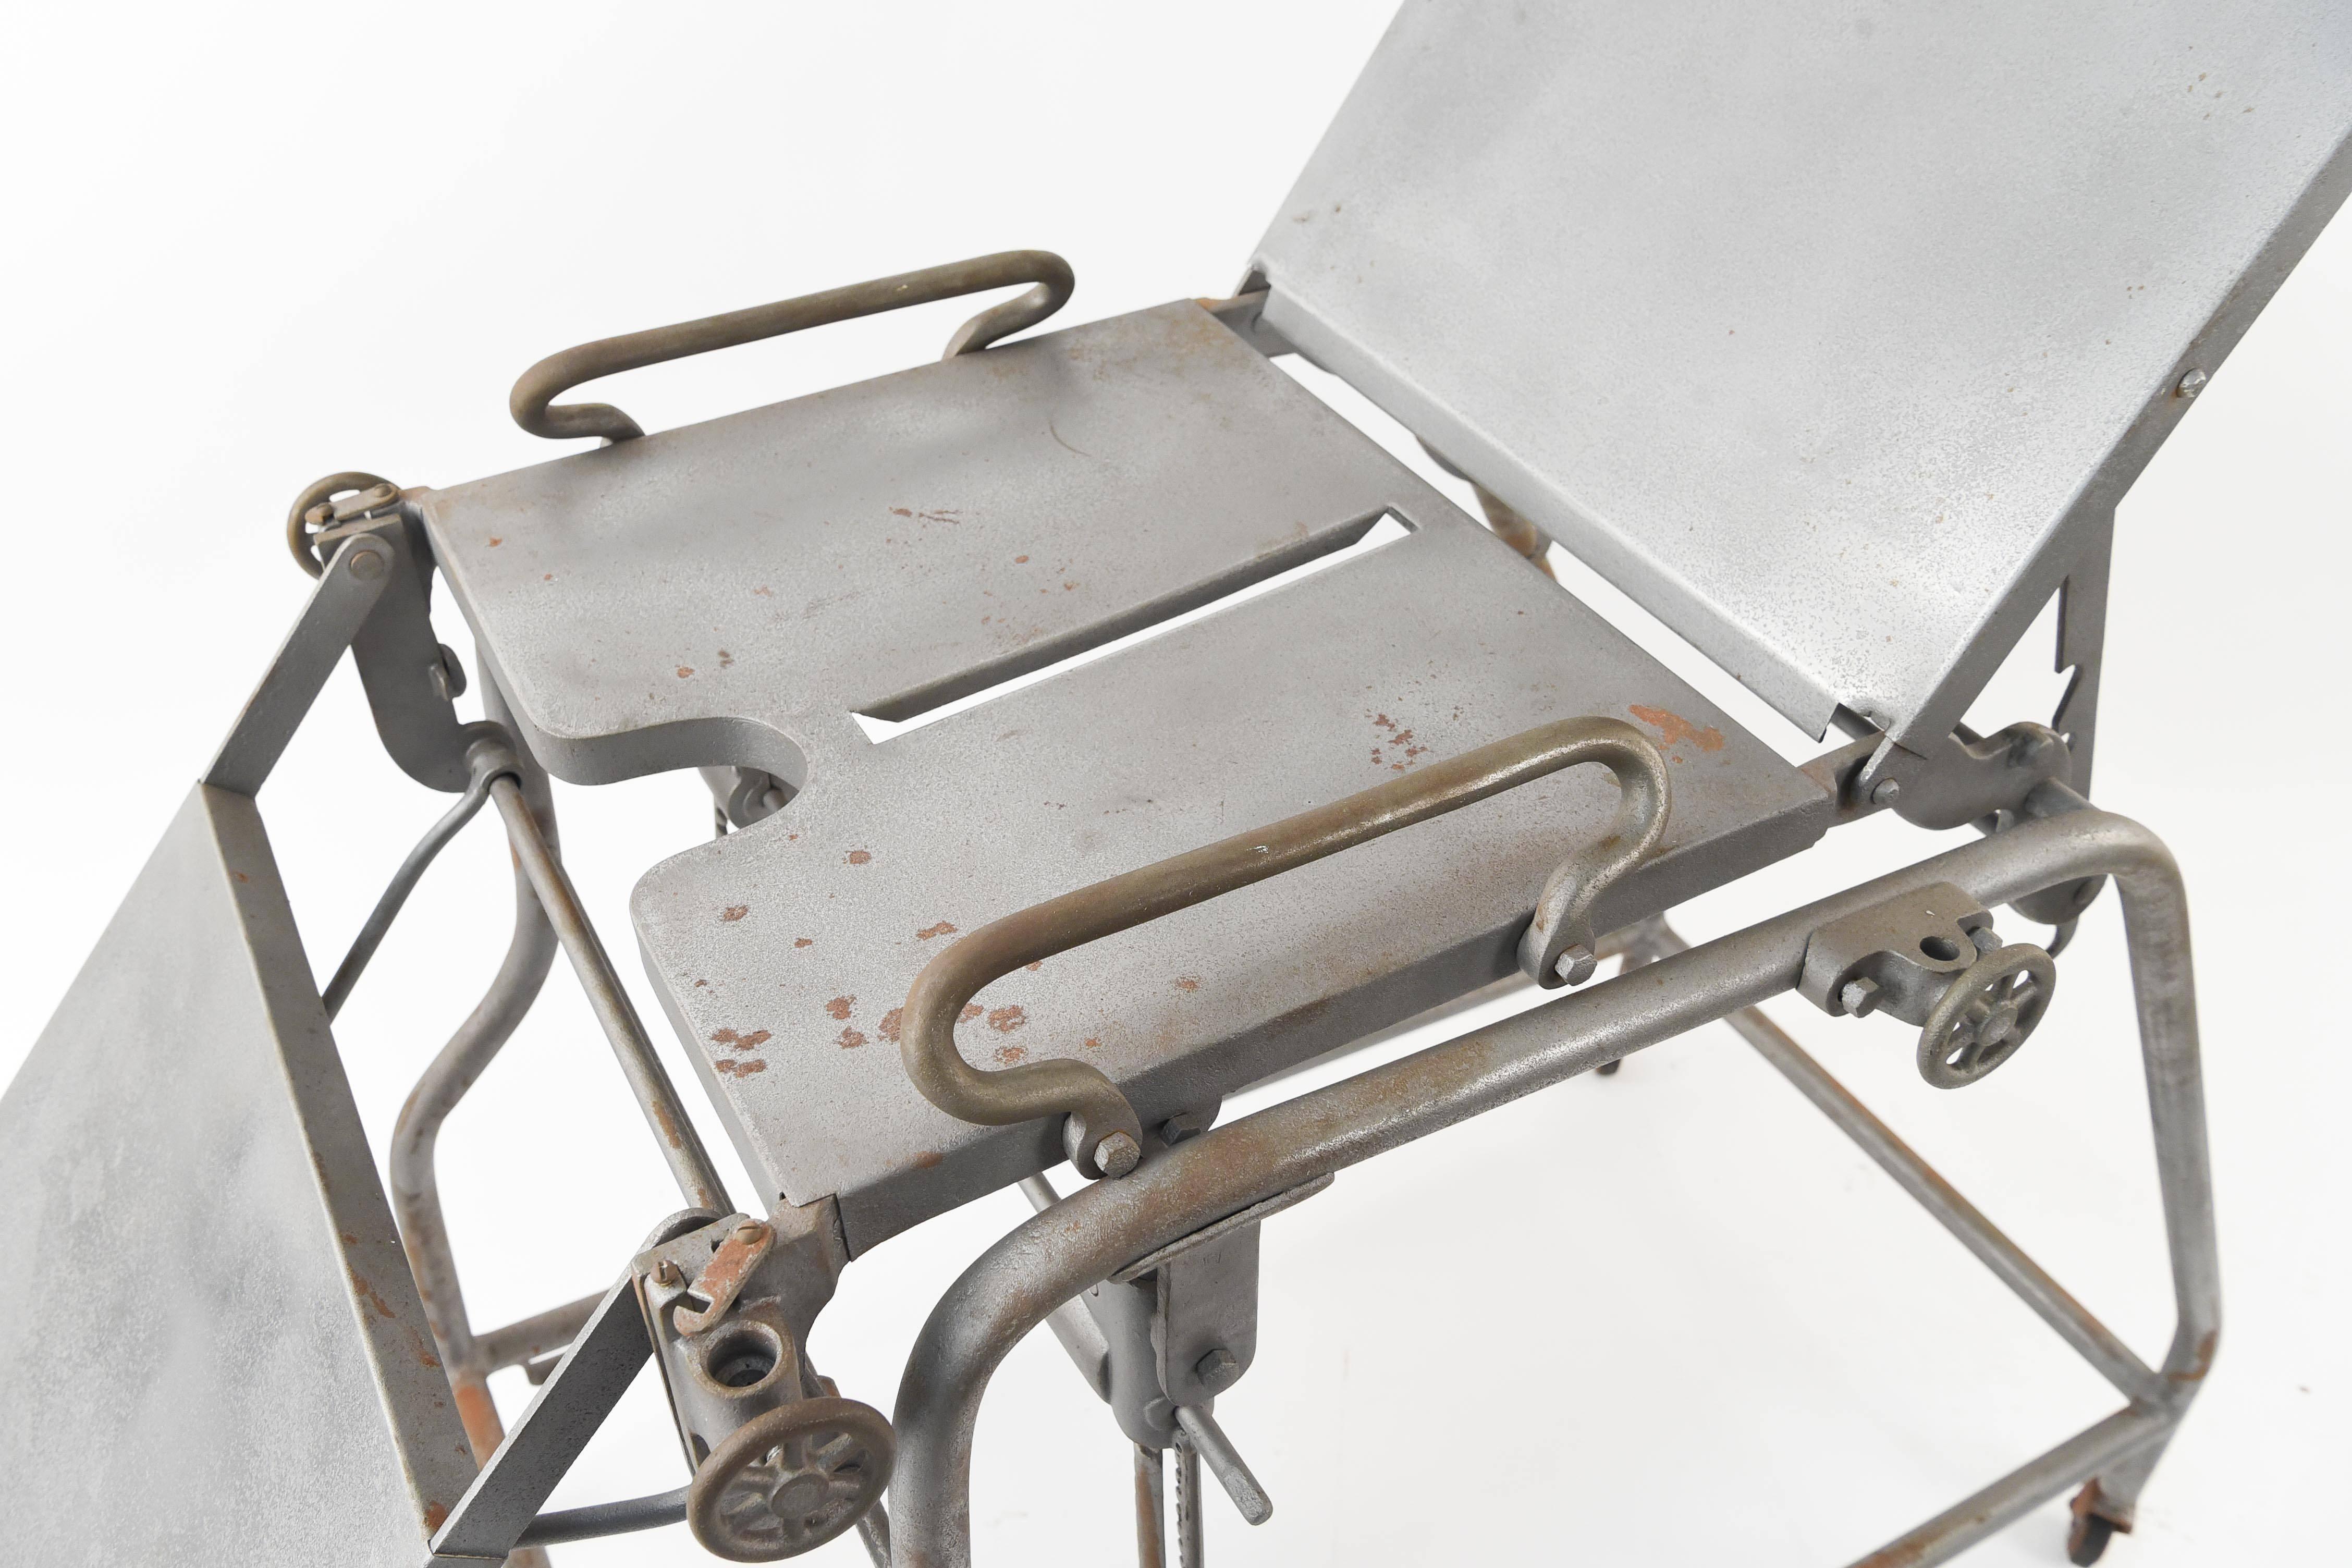 An awesome piece of history this medical chair being the top of the line at its time, no expense spared for comfort on this one!